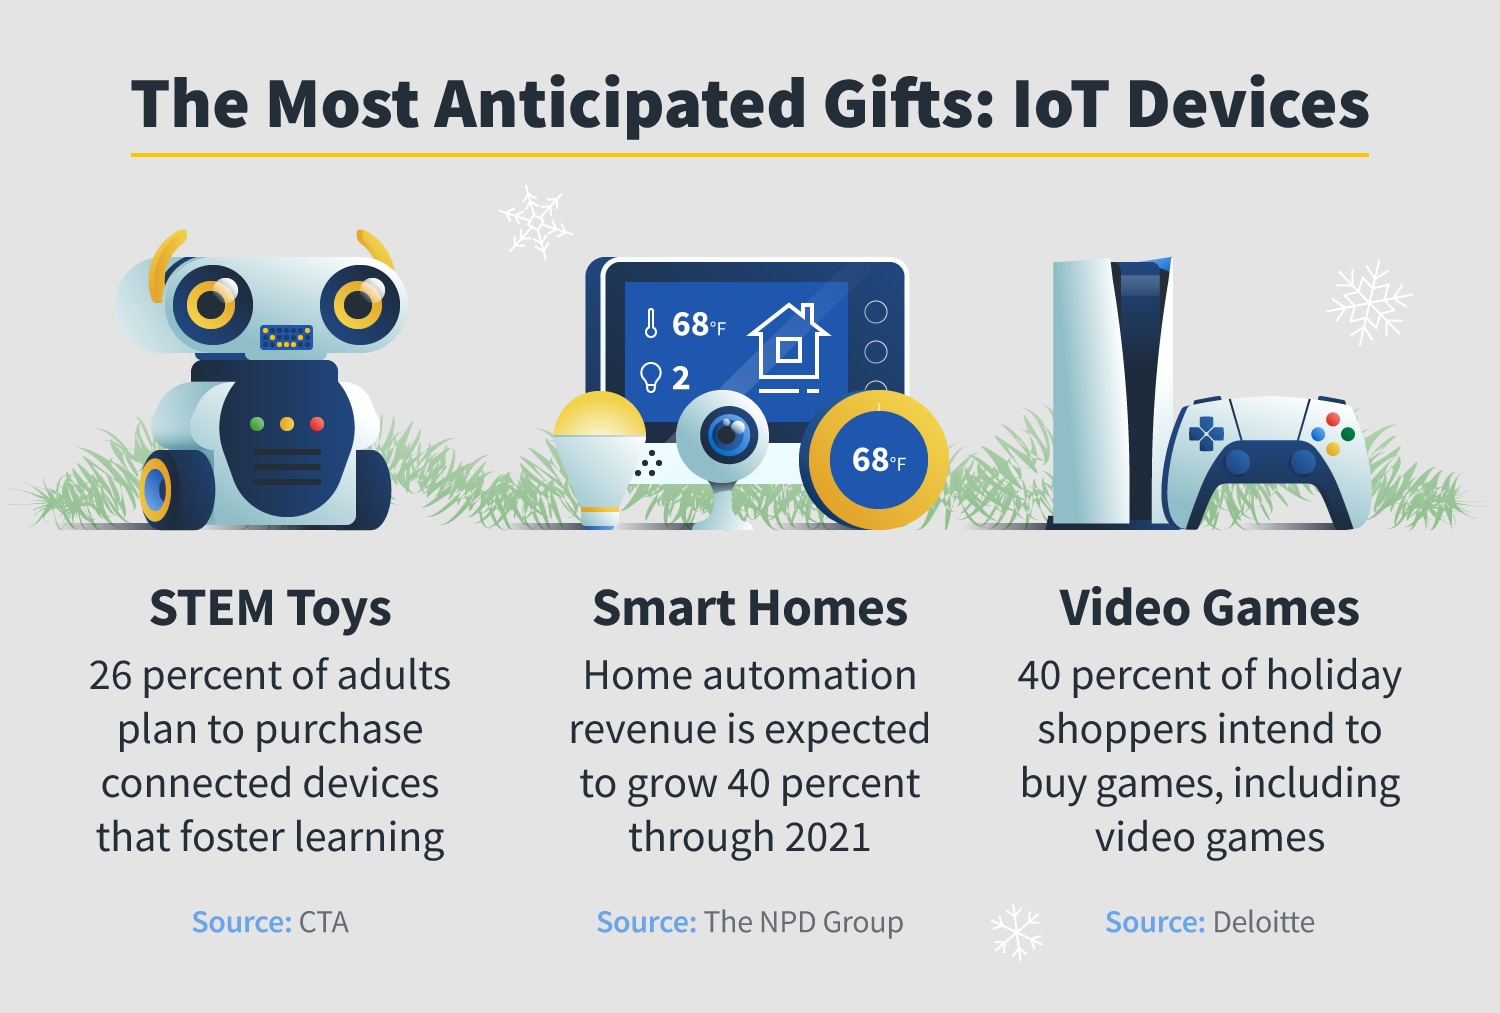 The most anticipated gifts Iot devices